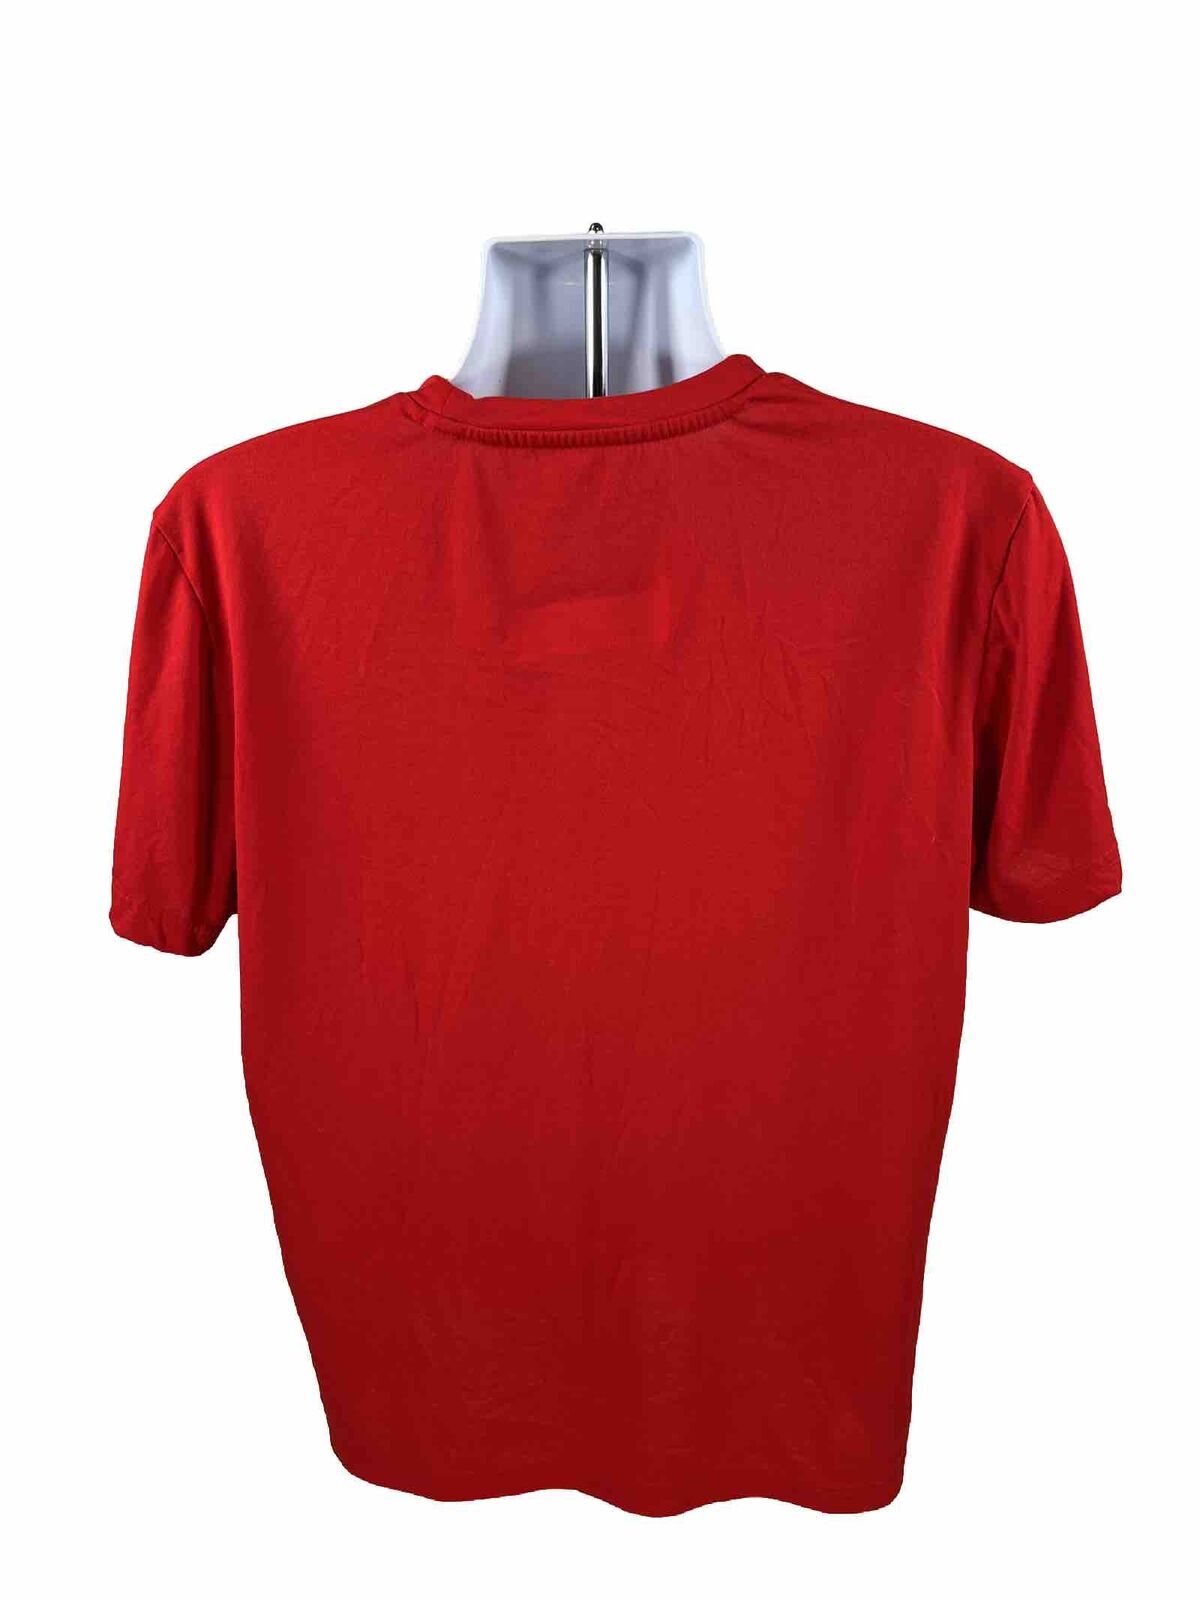 Adidas Men's Red Short Sleeve Climalite Polyester Athletic Shirt - L